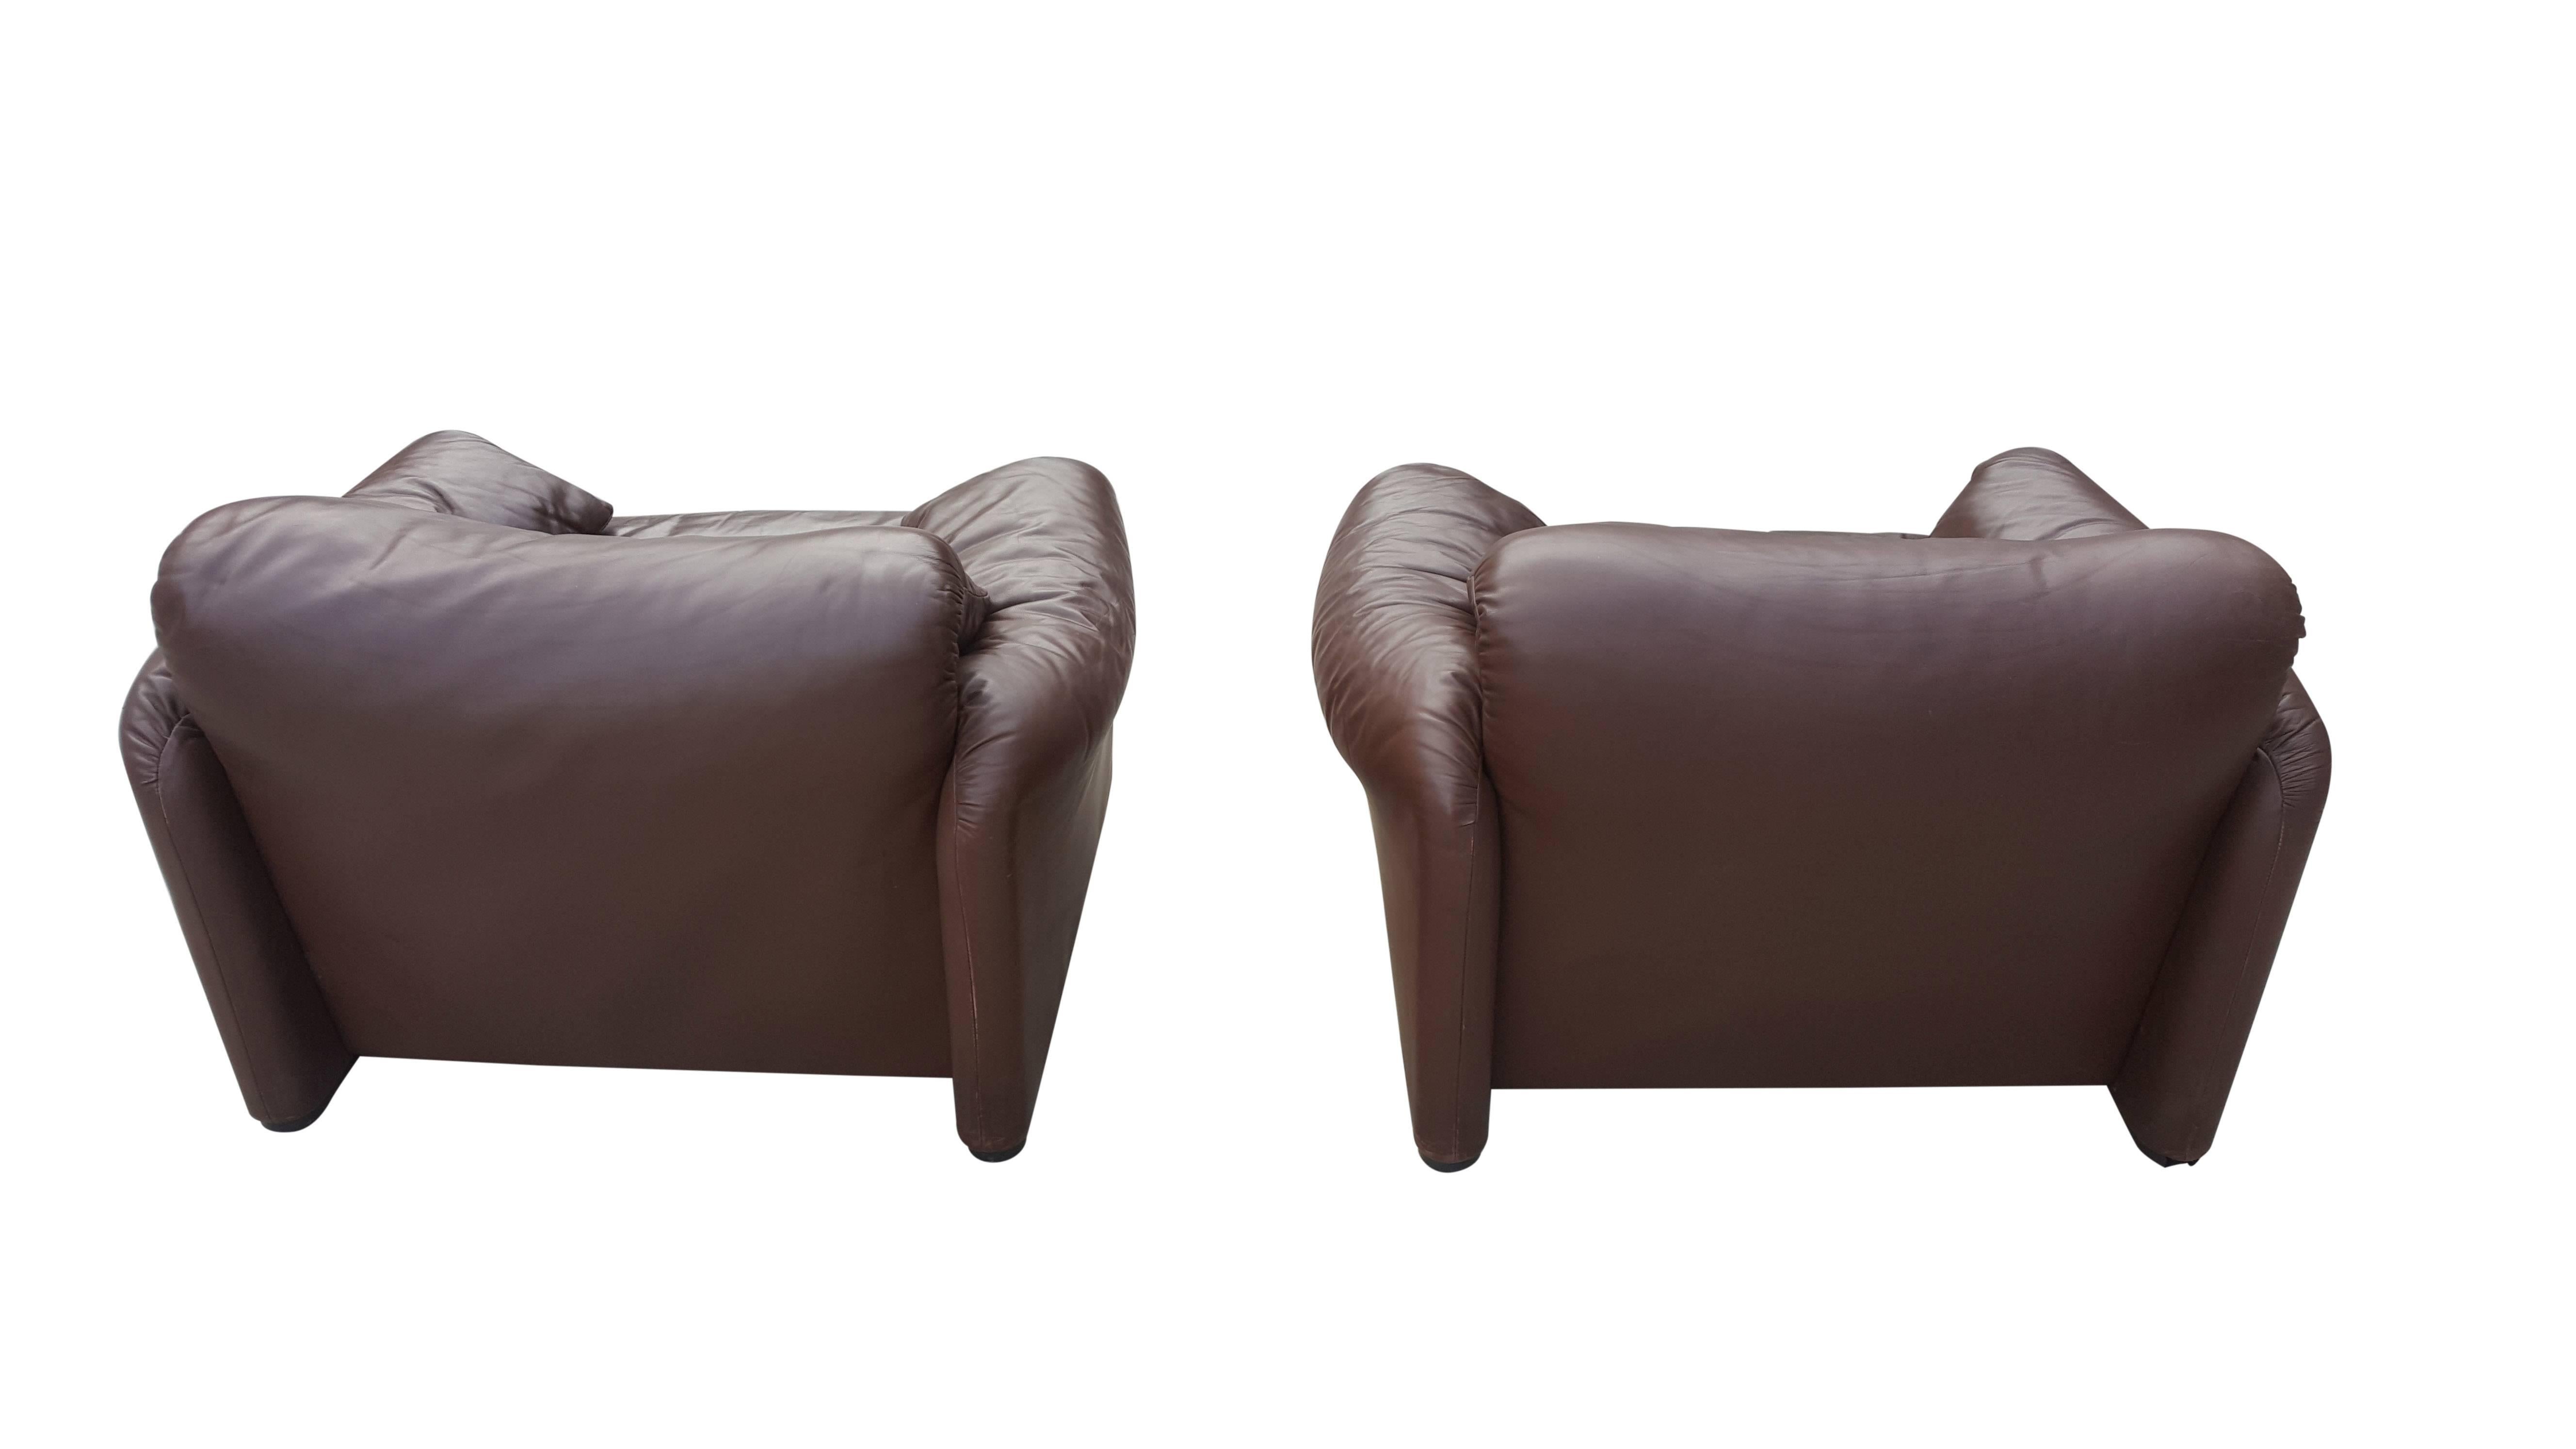 Leather Maralunga Brown Chocolate Sofa Set by Vico Magistretti for Cassina For Sale